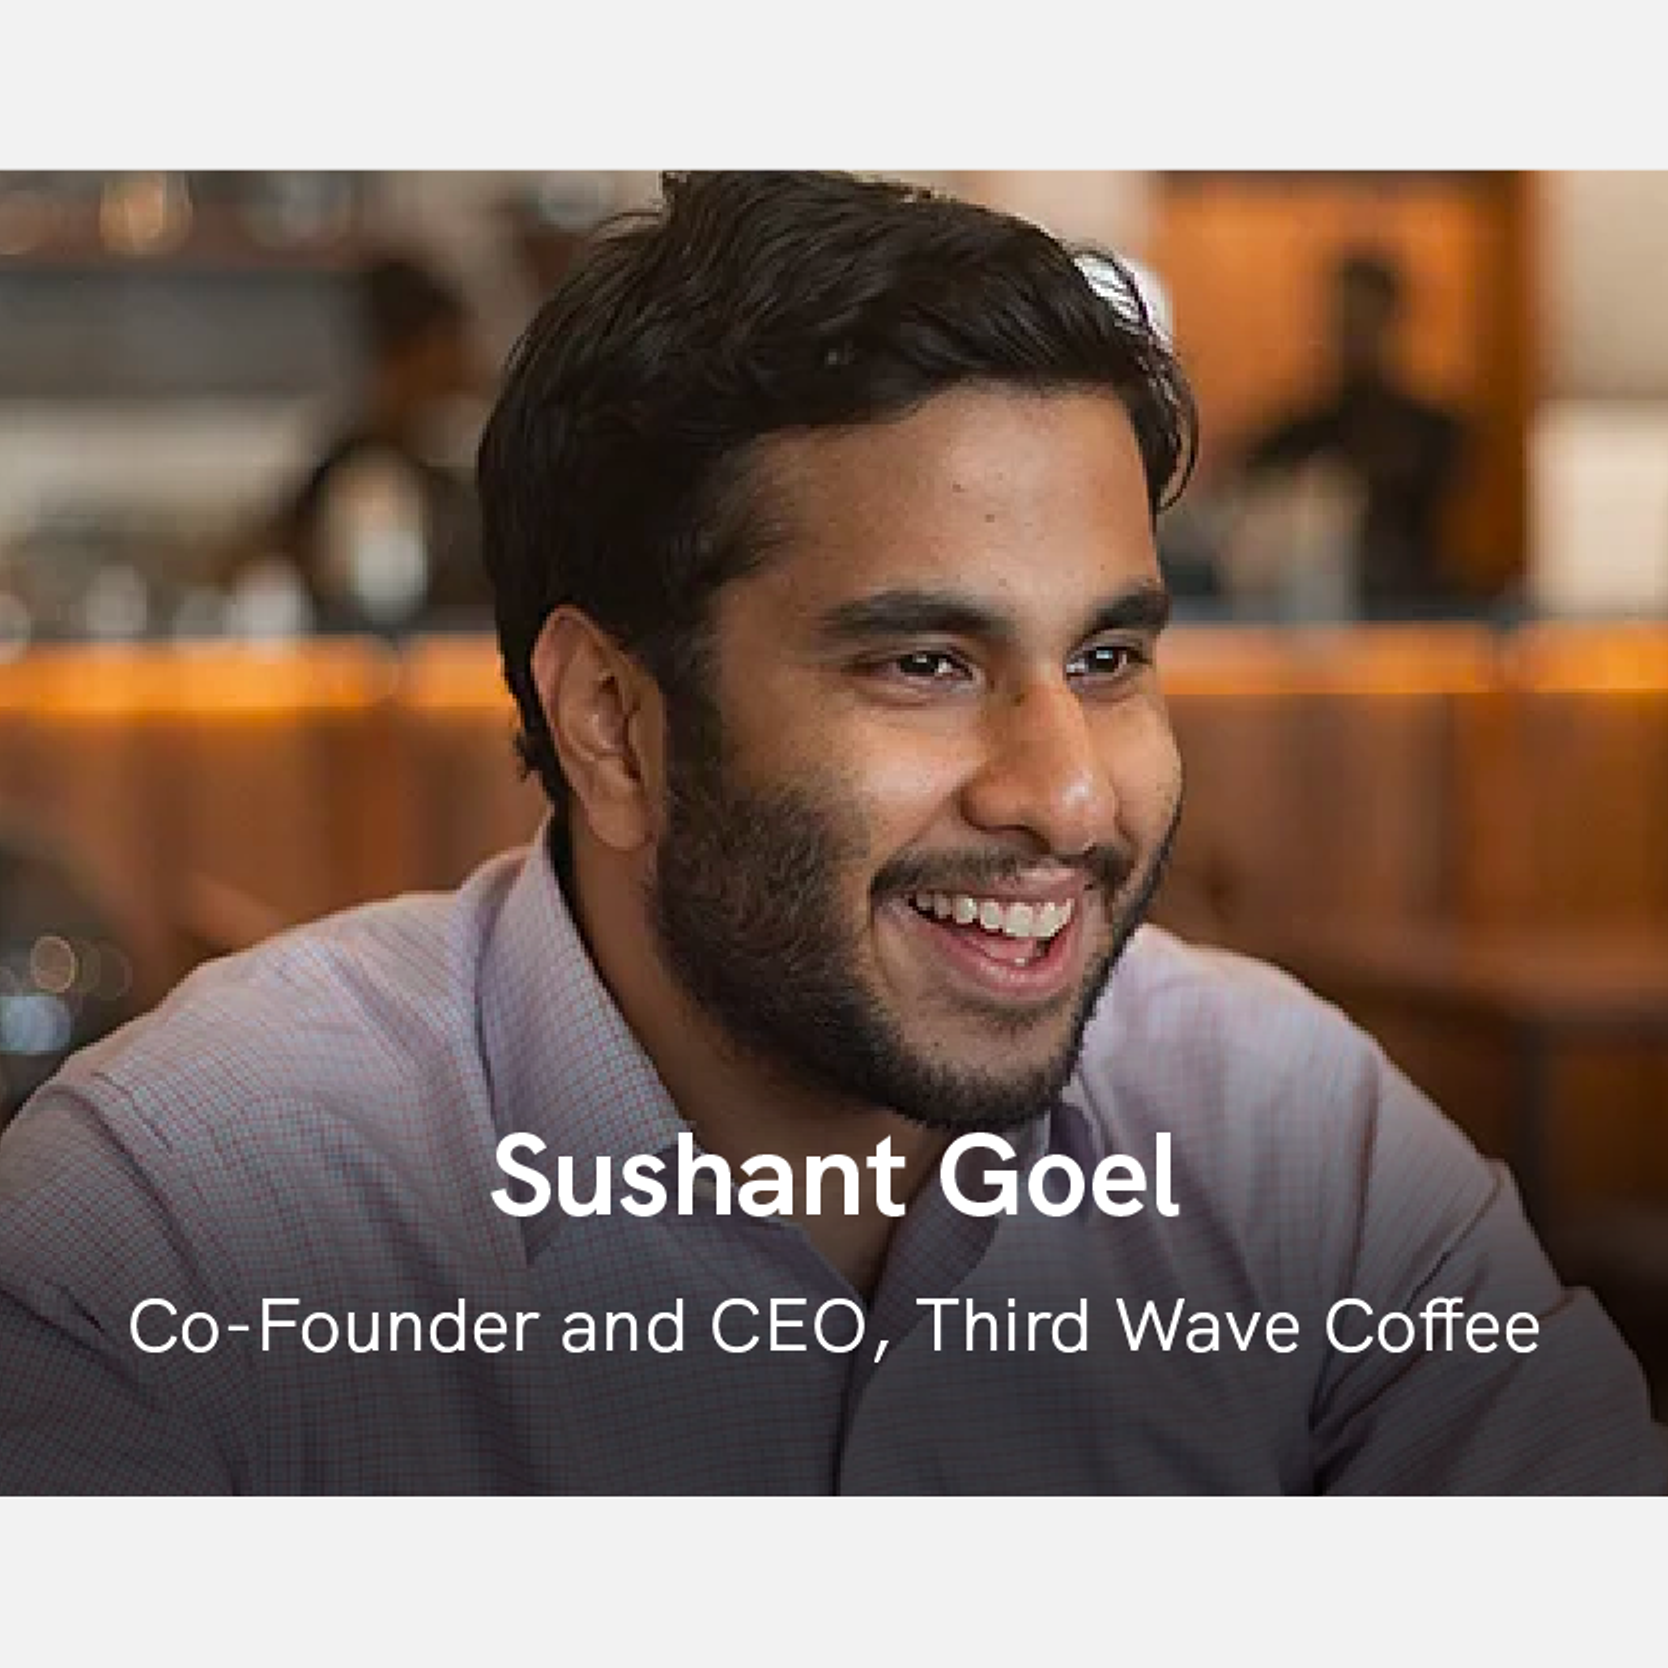 ‘Third Wave Coffee will have 150-200 outlets across India in the next 15 months’